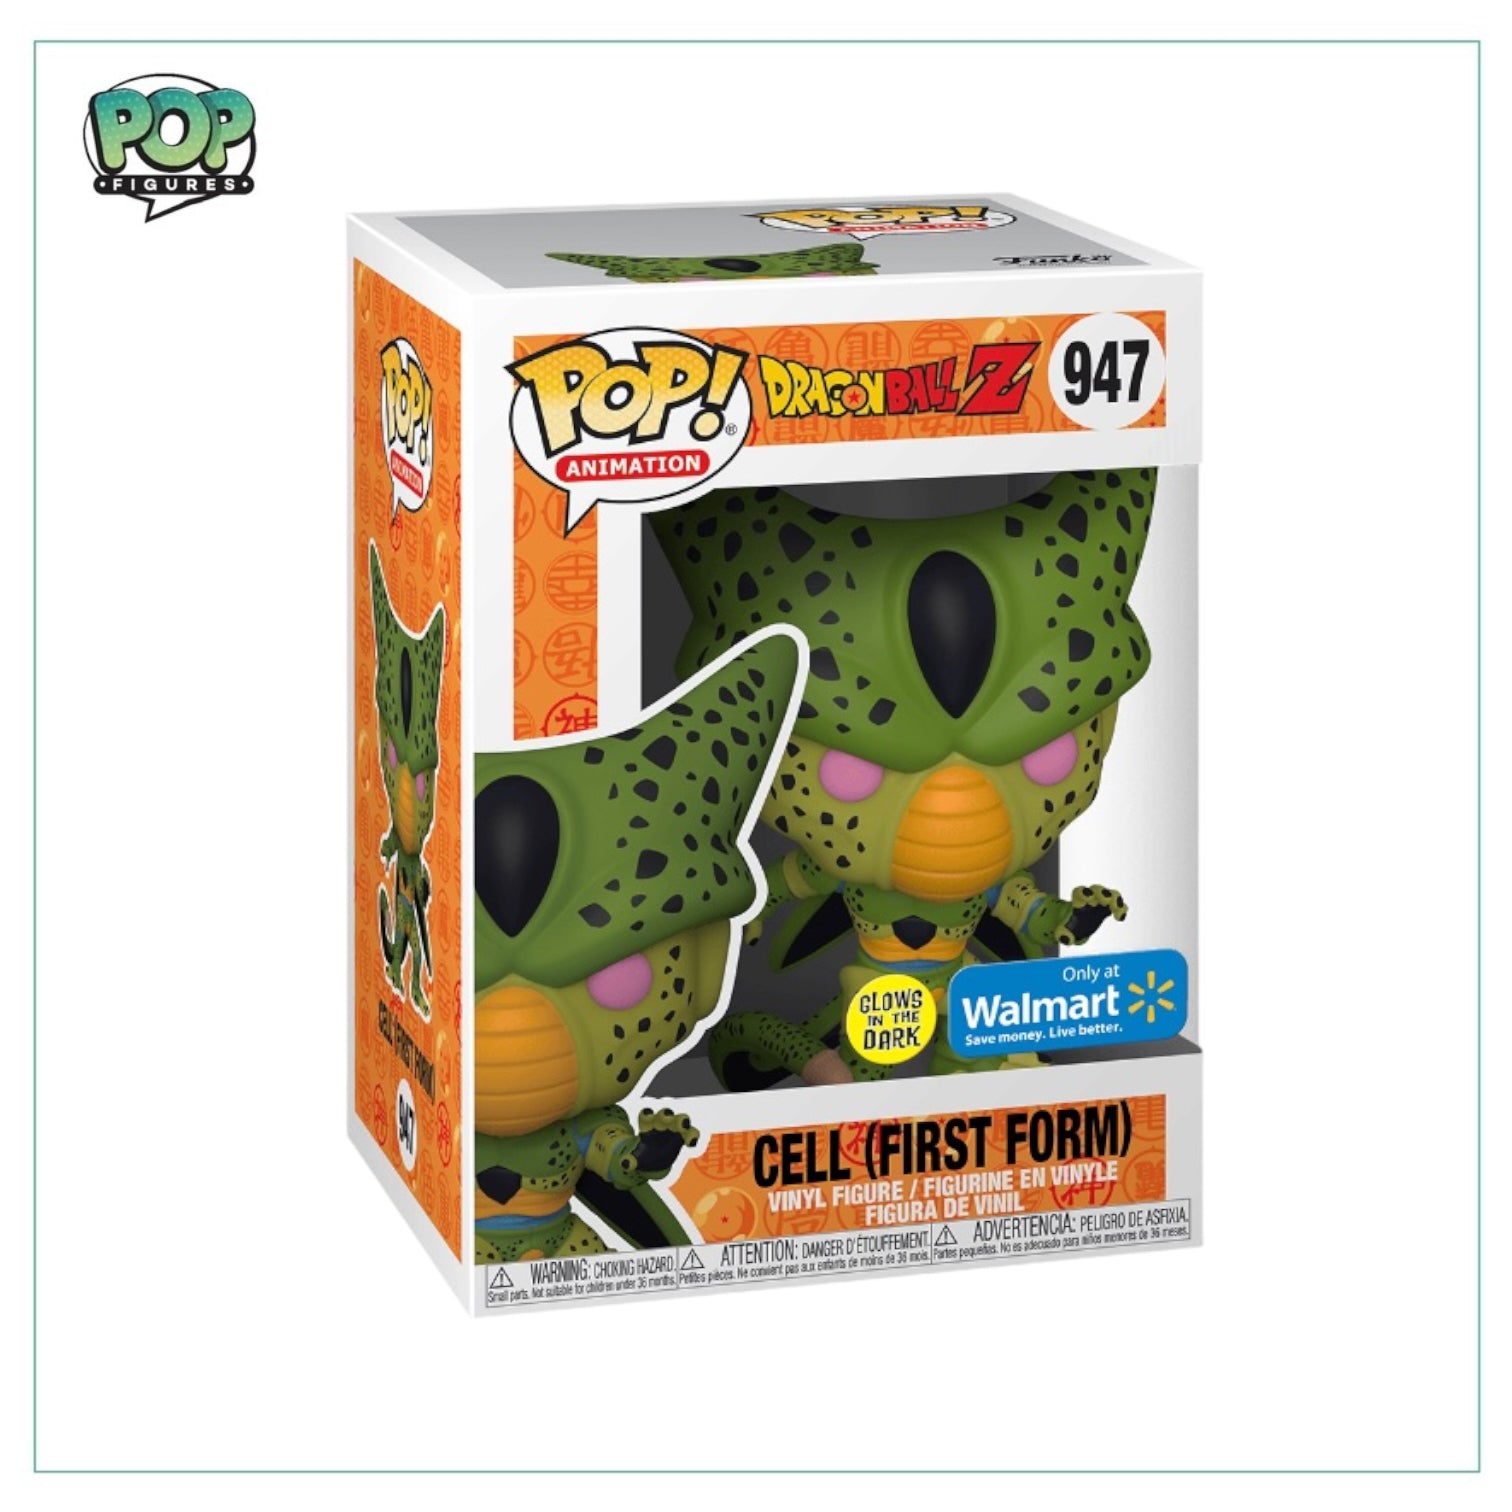 Cell (First Form) (Glow In The Dark) #947 Funko Pop! - Dragon Ball Z - Walmart Exclusive - Angry Cat